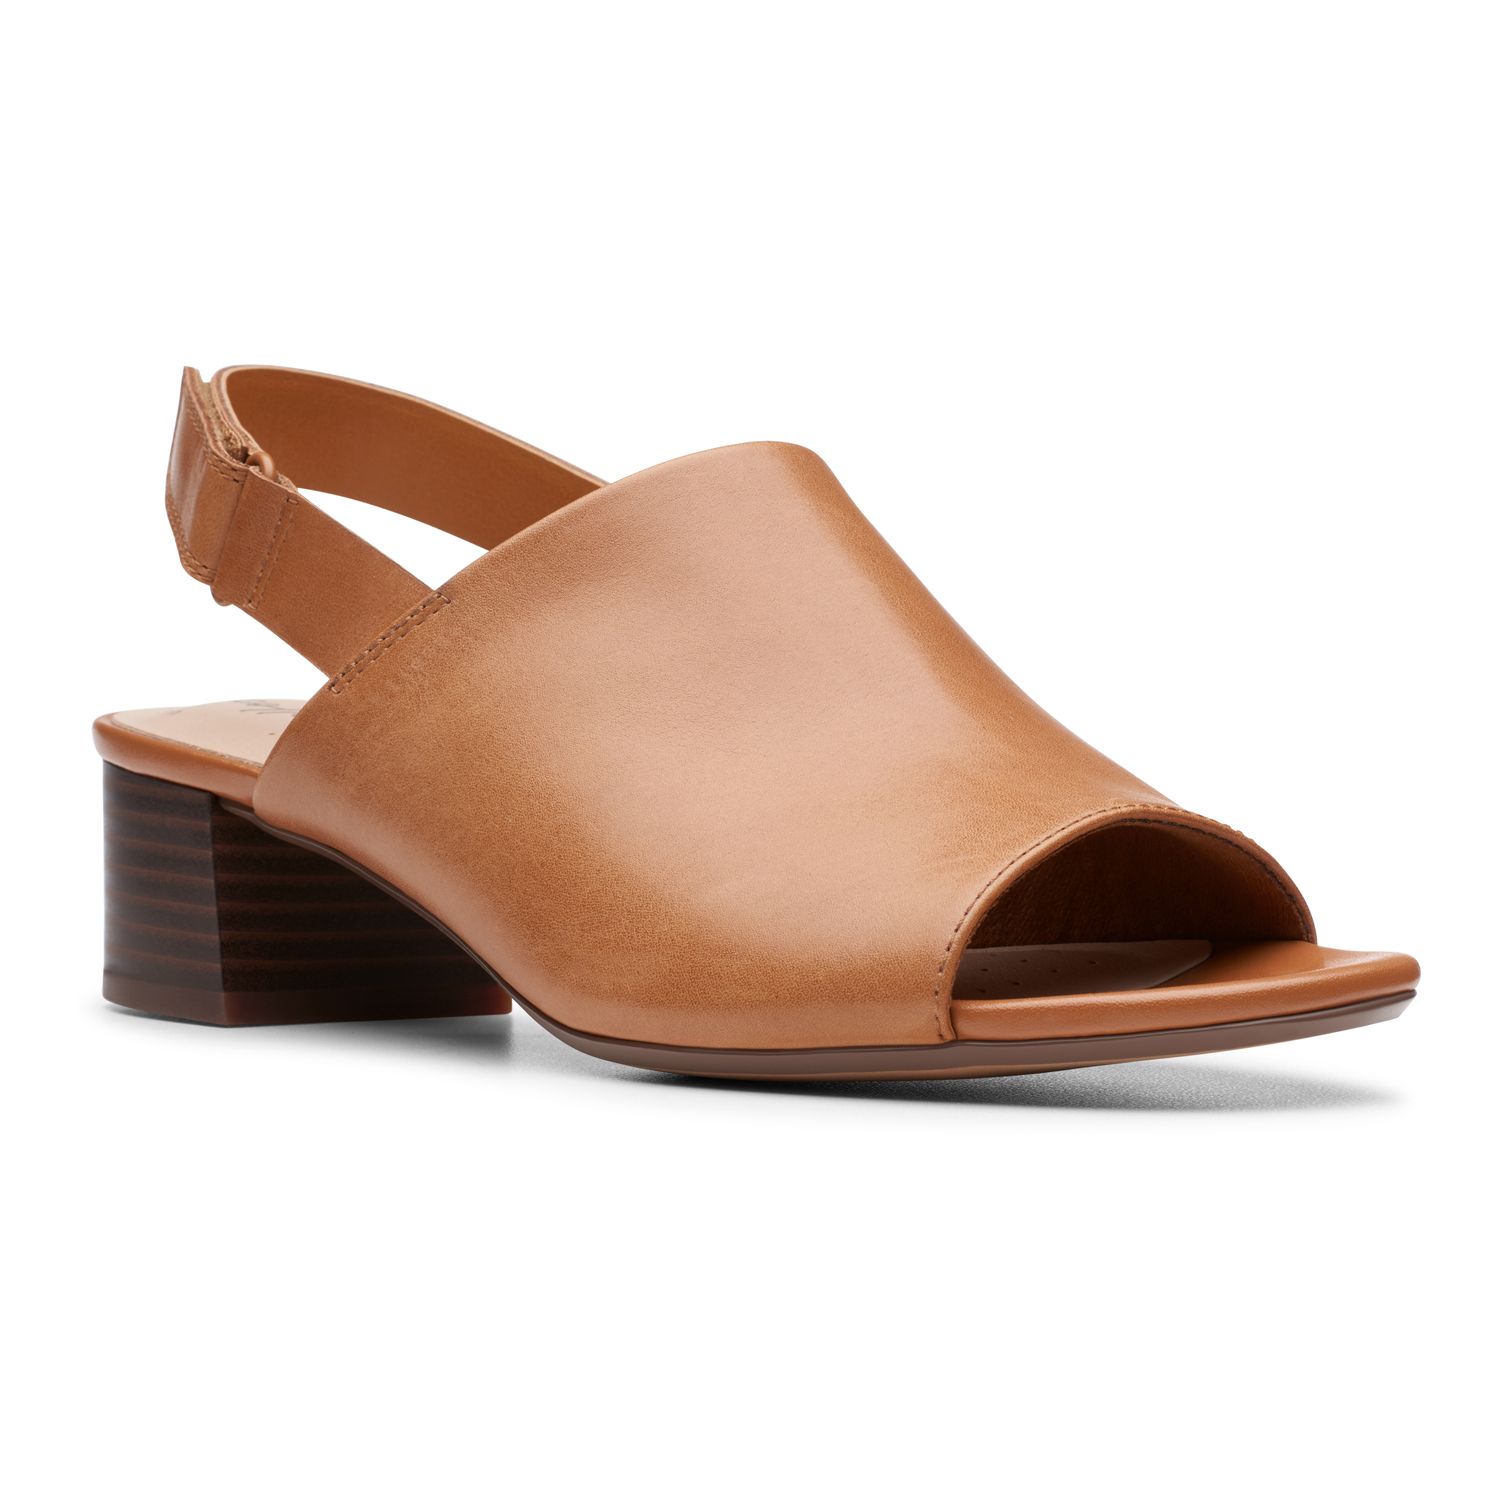 leather clarks sandals